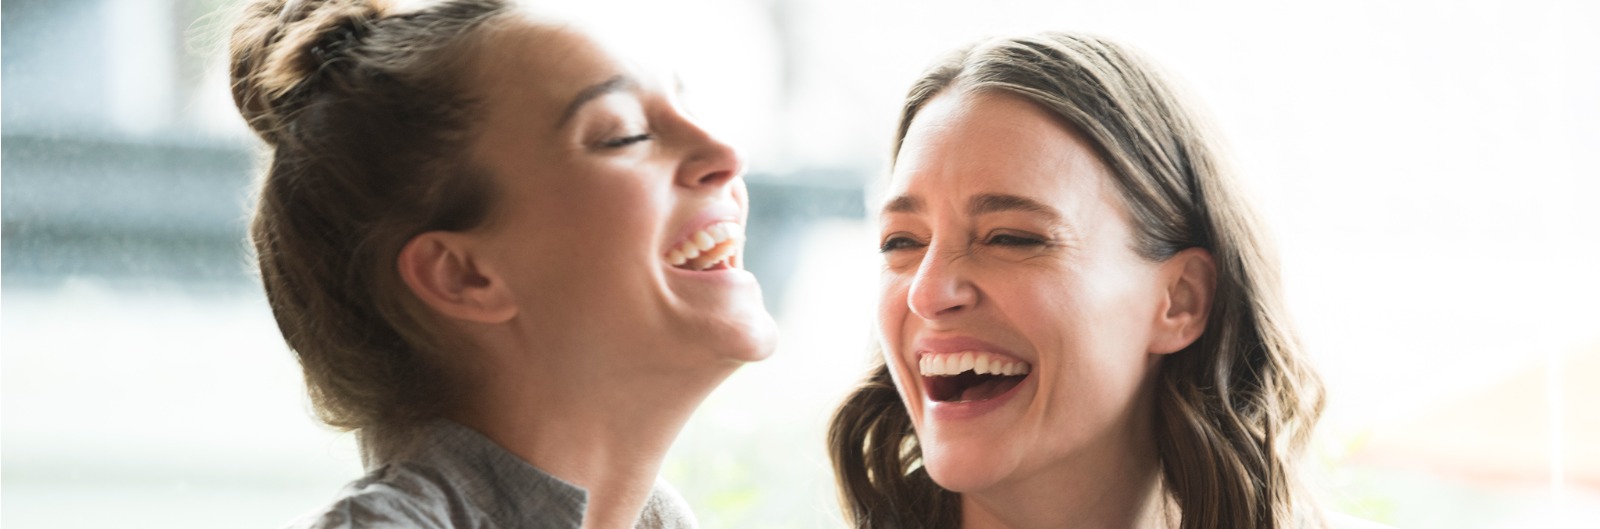 woman-holding-mobile-phone-with-freind-laughing-picture-id1600x529.jpg